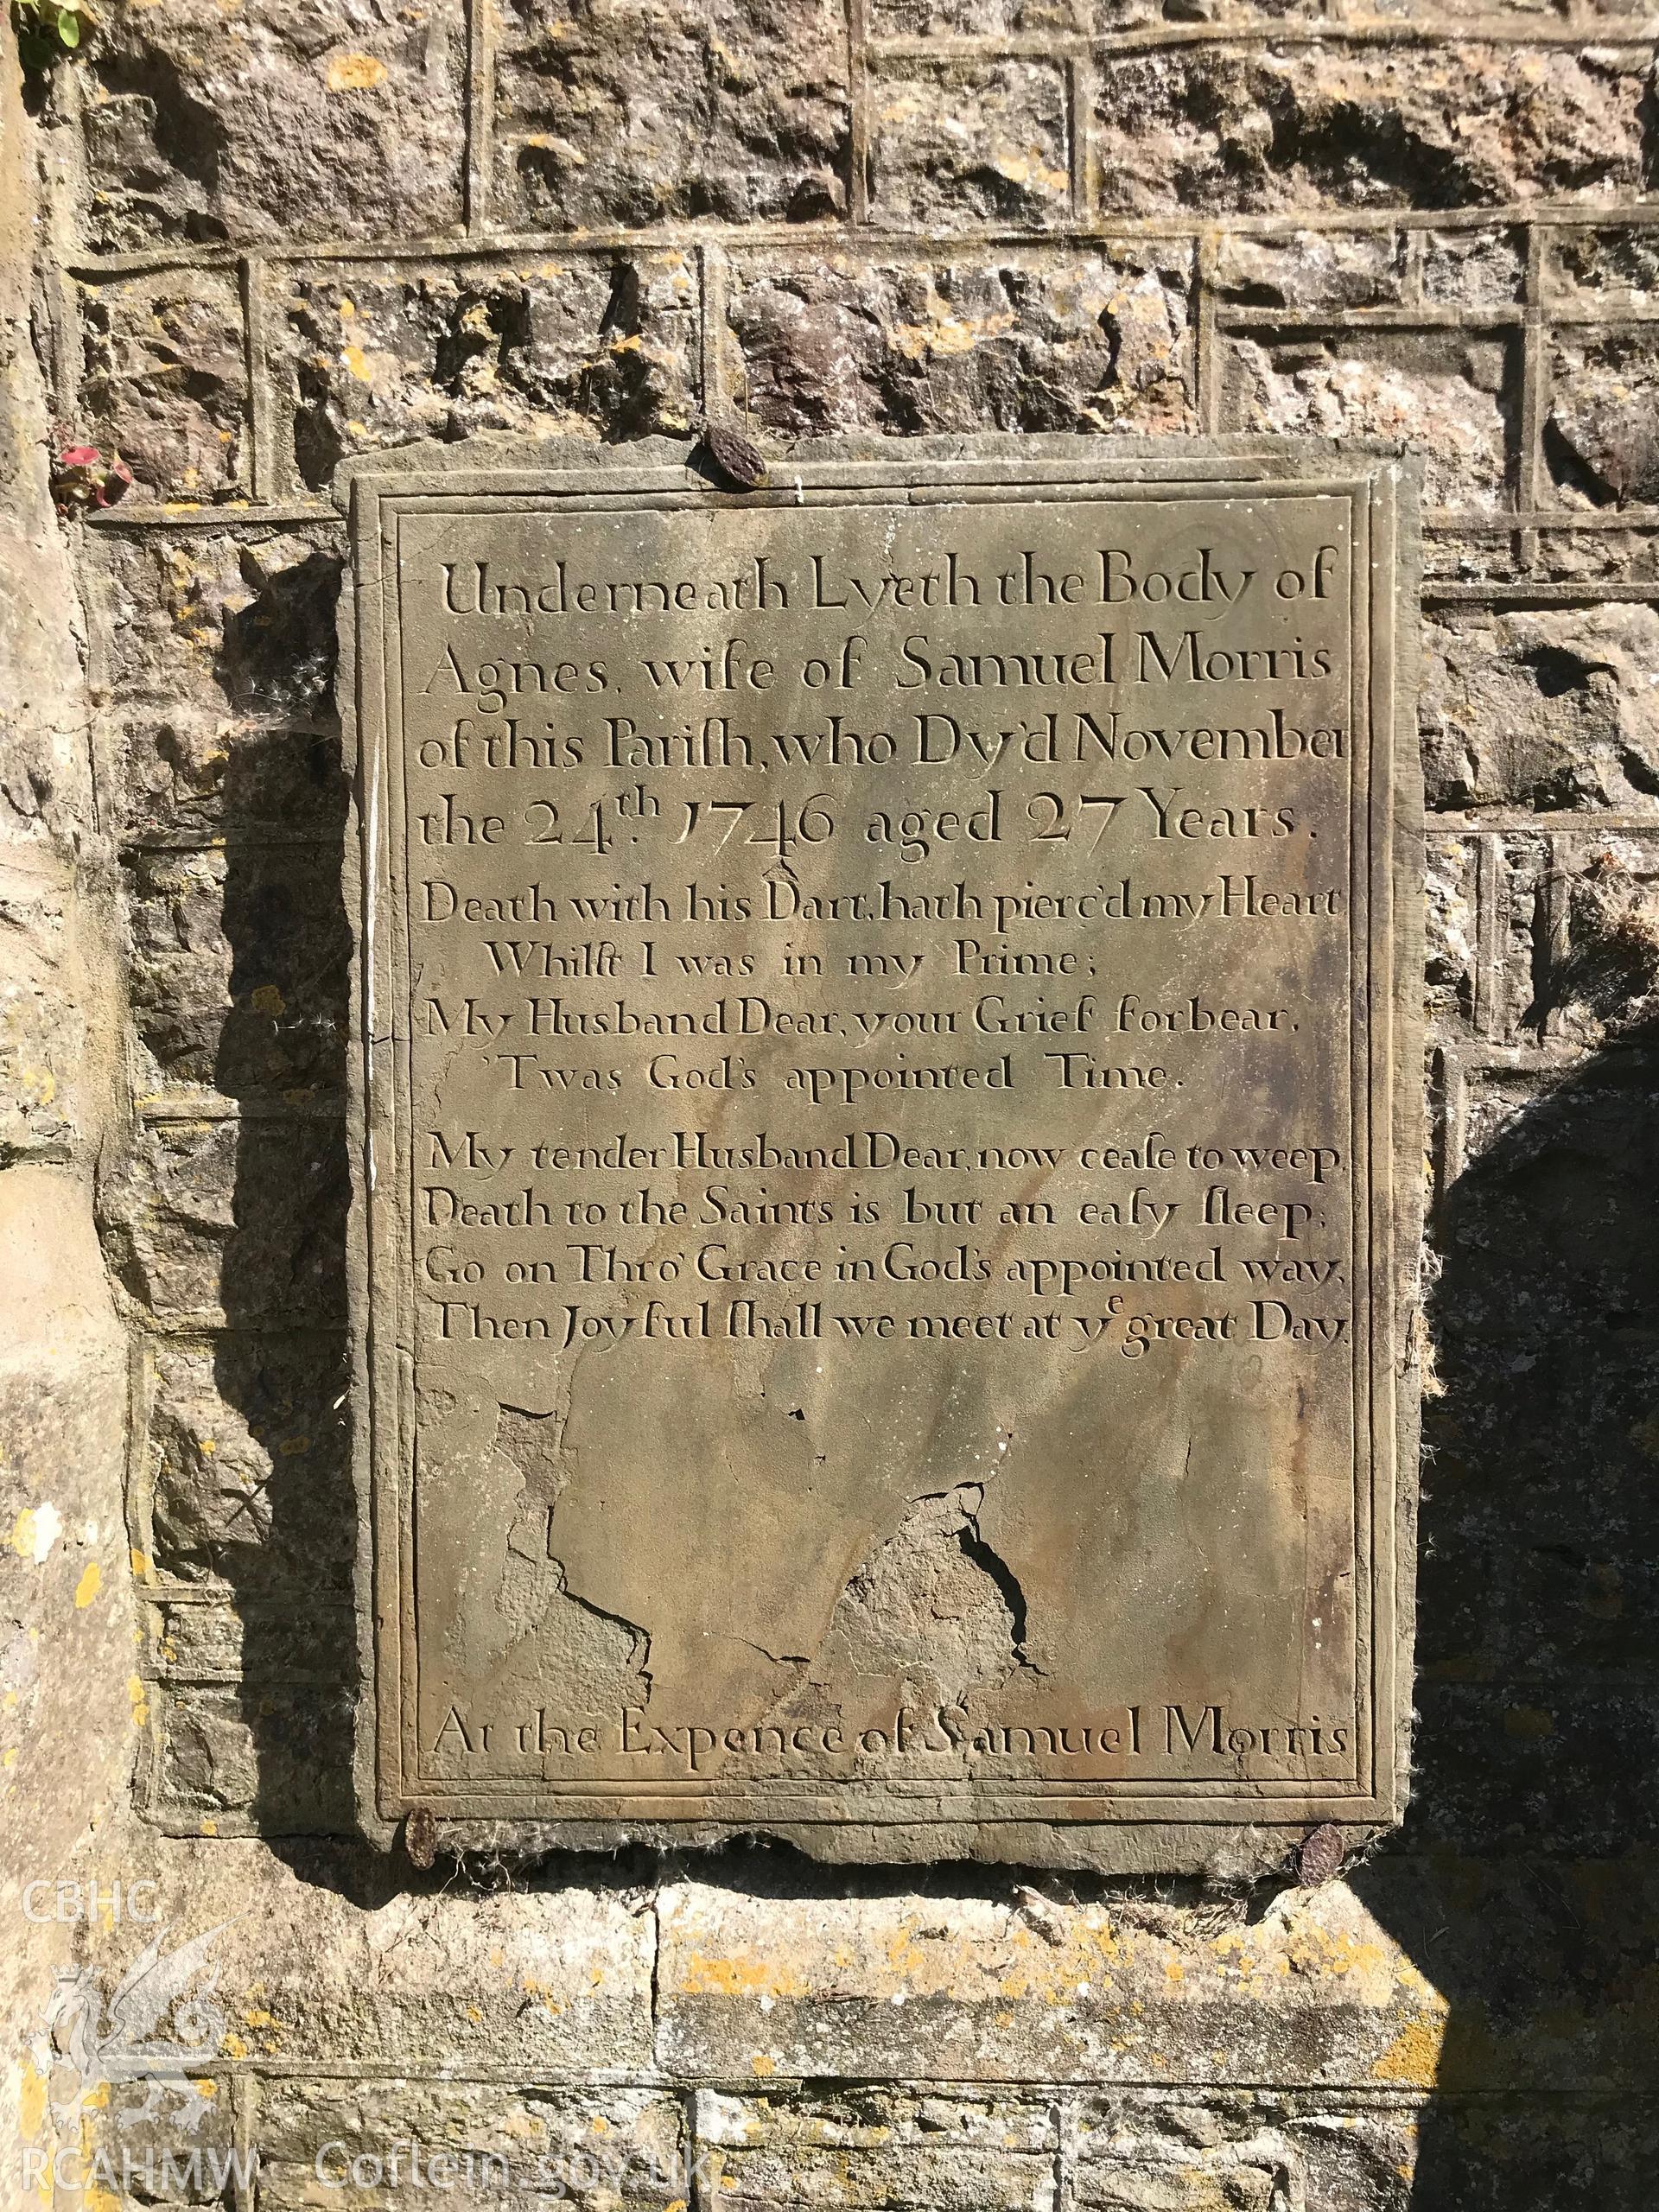 Digital colour photograph showing detailed view of memorial stone dedicated to Agness Morris and dated 1746 at St Rhidian and Illtyd's church, Llanrhidian, taken by Paul R. Davis on 5th May 2019.